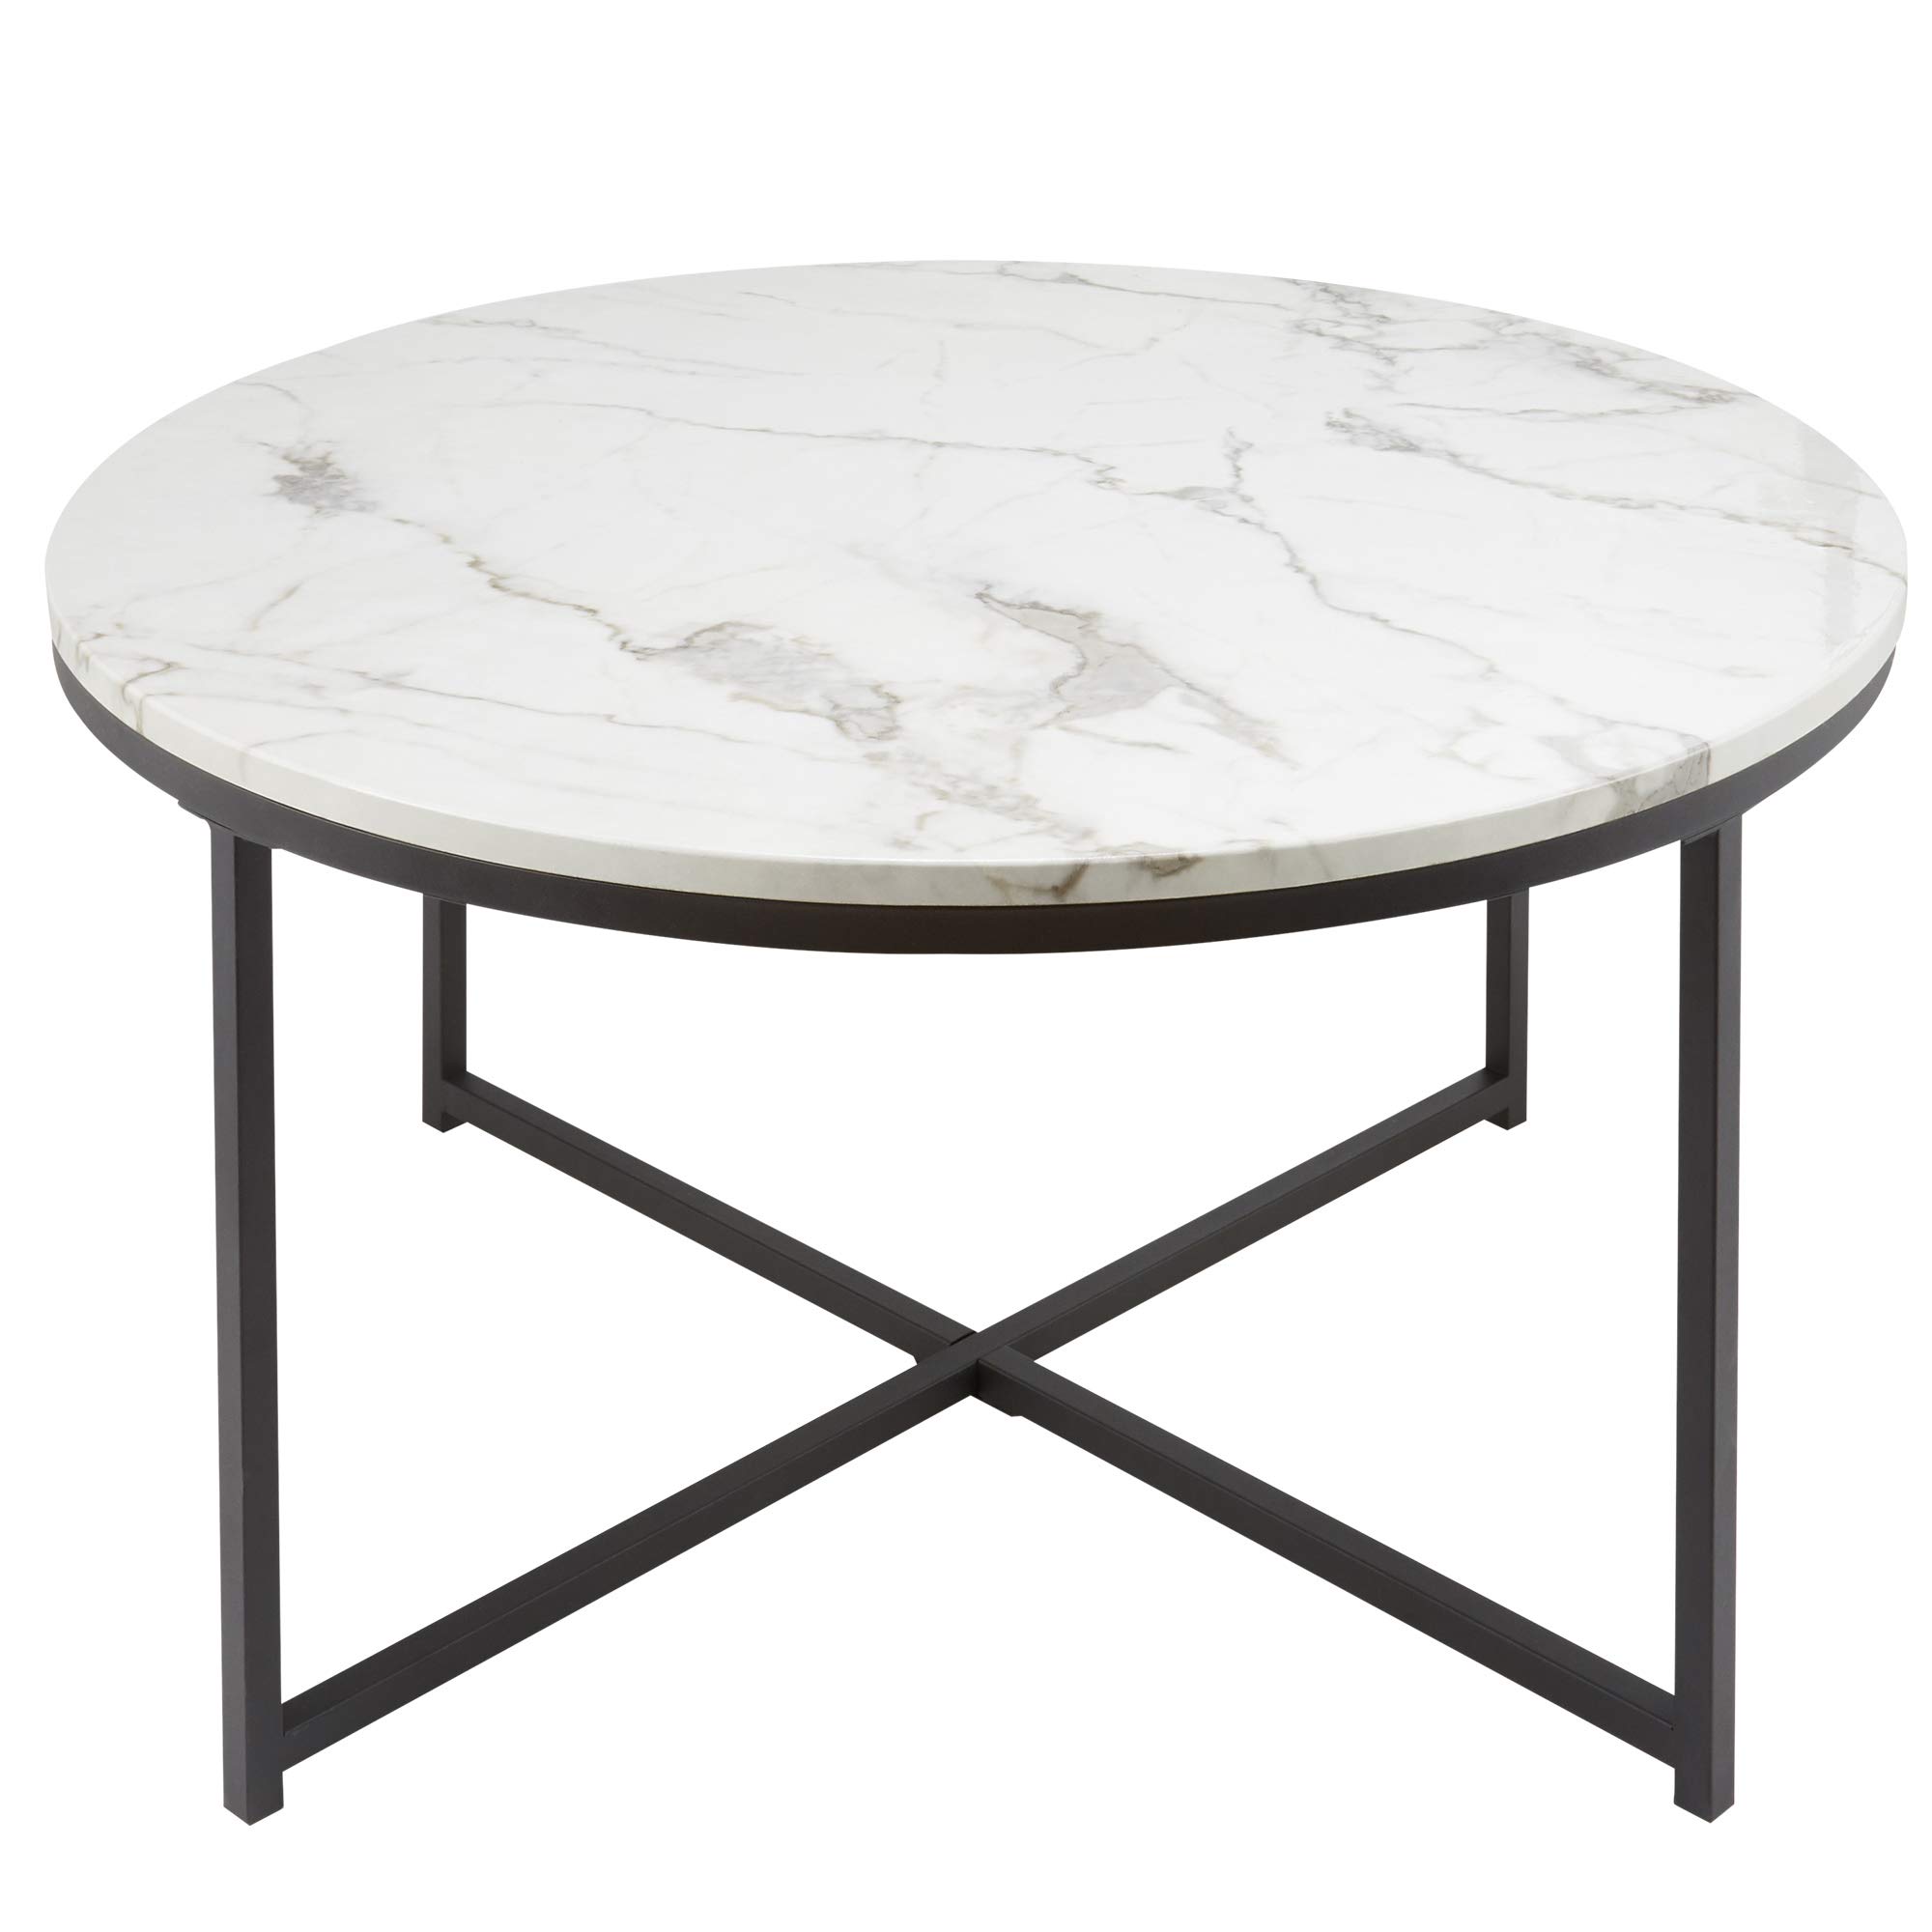 VONLUCE 36" Modern Round Coffee Table with Faux Marble Top, Mid-Century Cocktail Table with Metal Frame, Accent Table for Living Rooms Bedrooms...